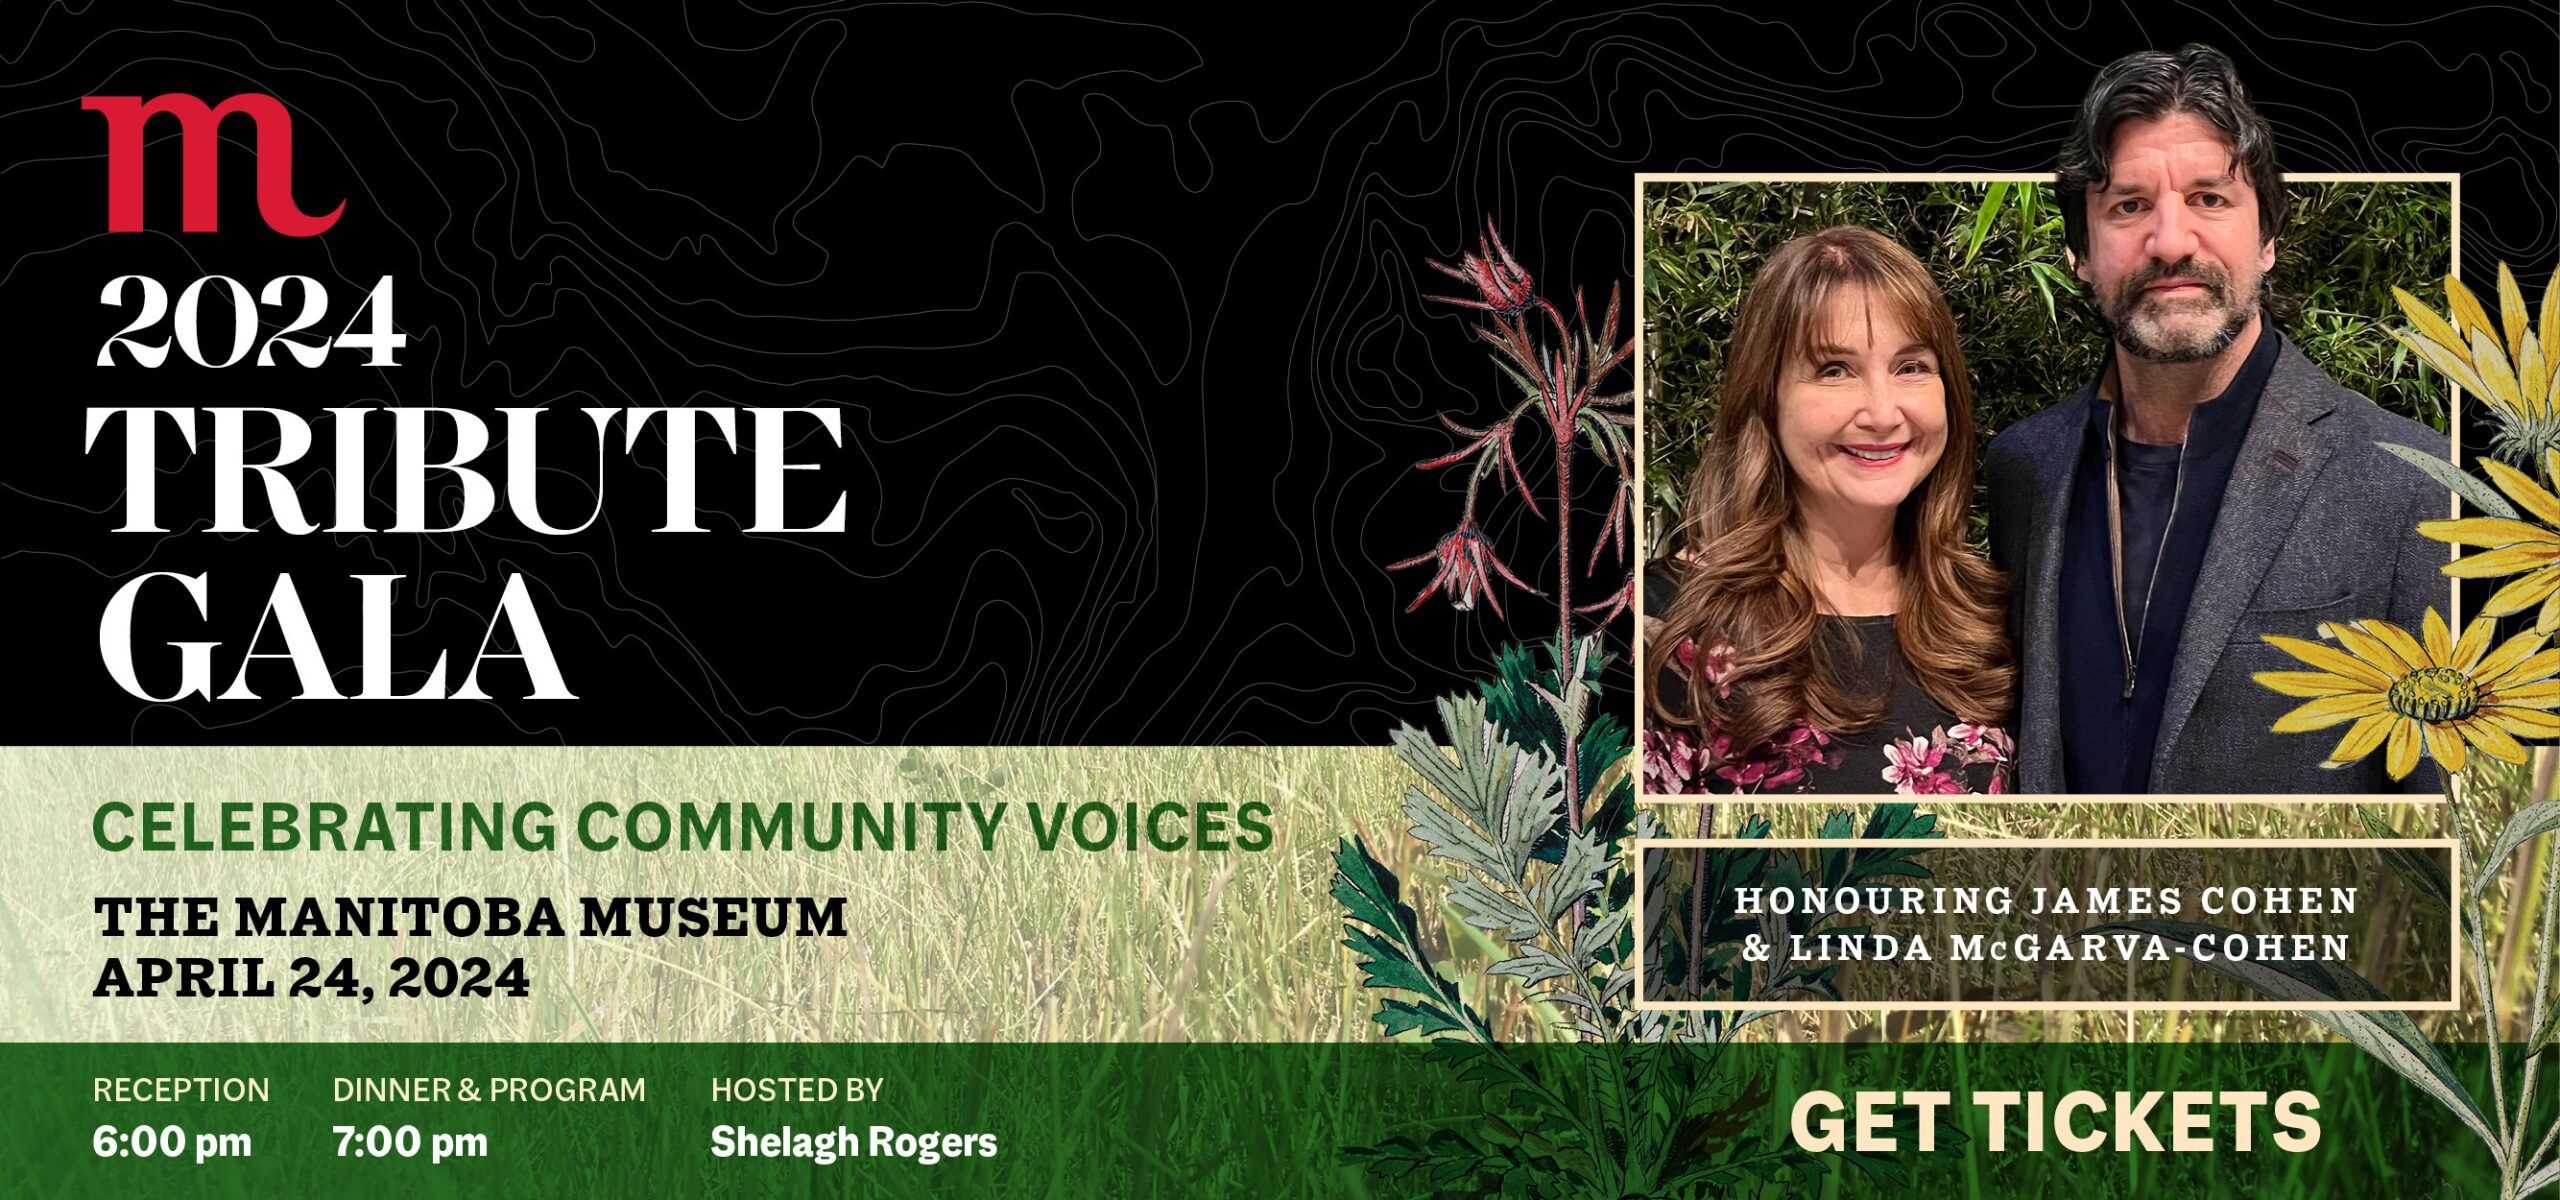 Promotional graphic for the Manitoba Museum's 2024 Tribute Gala. On the right is a photograph of honourees James Cohen and Linda McGarva-Cohen. On the left, text reads, 